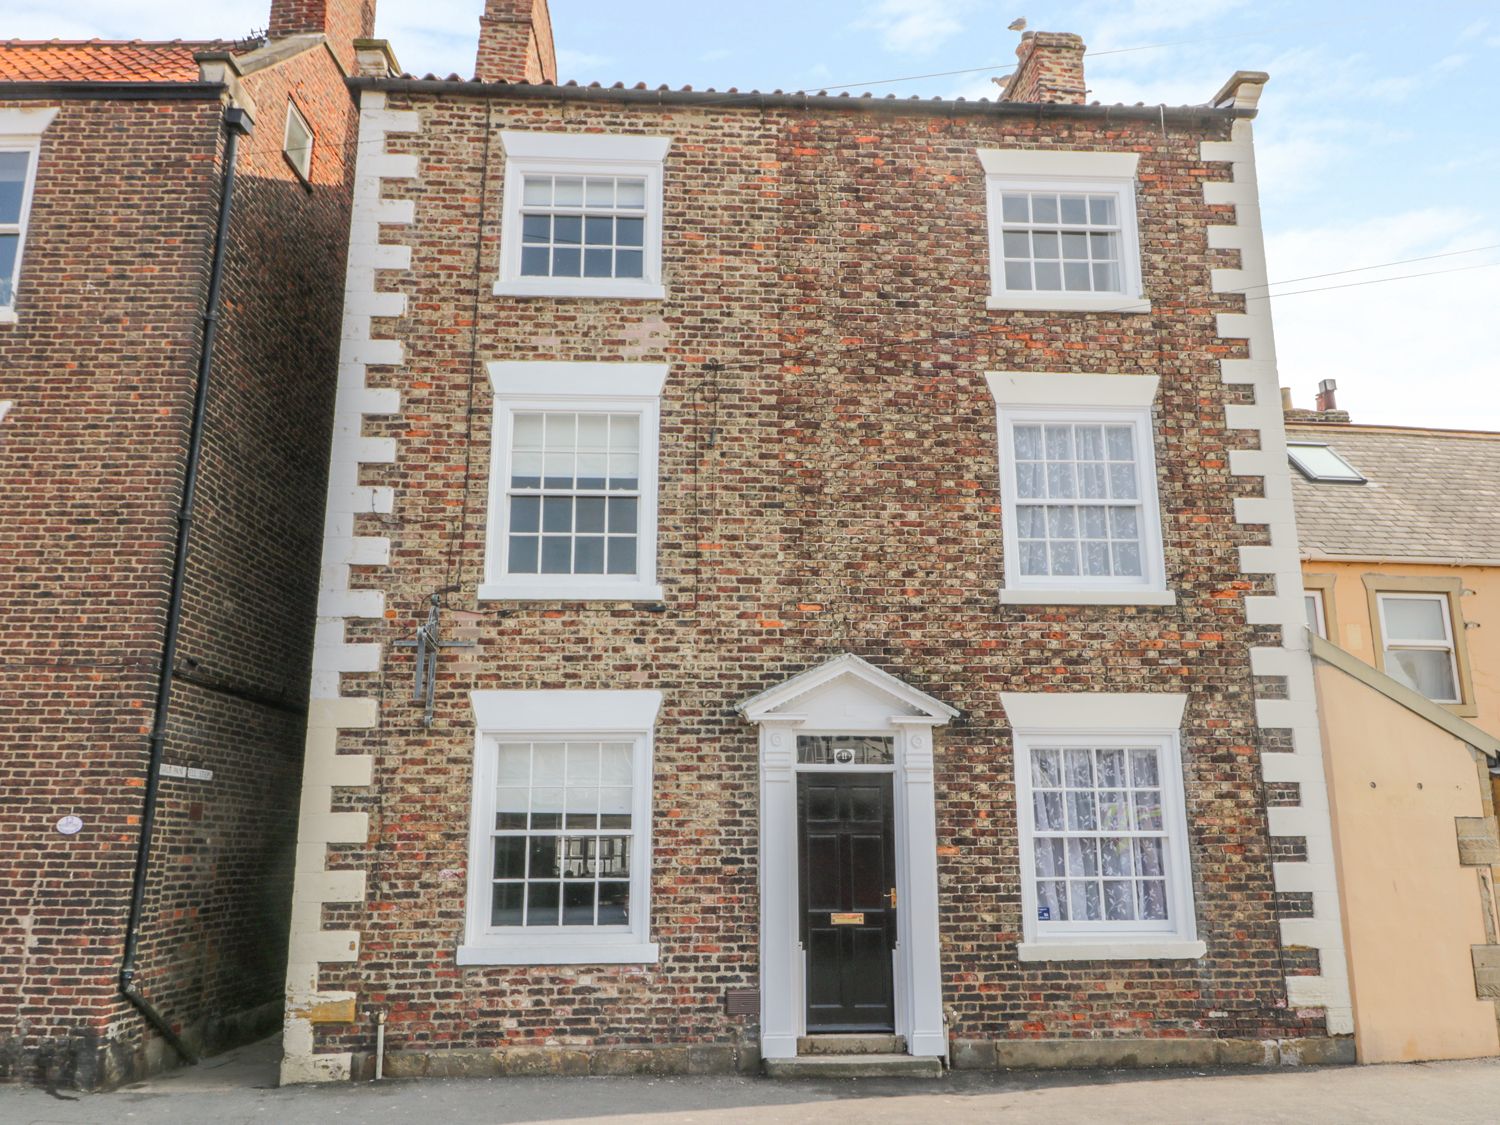 11 Church Street - North Yorkshire (incl. Whitby) - 1005355 - photo 1